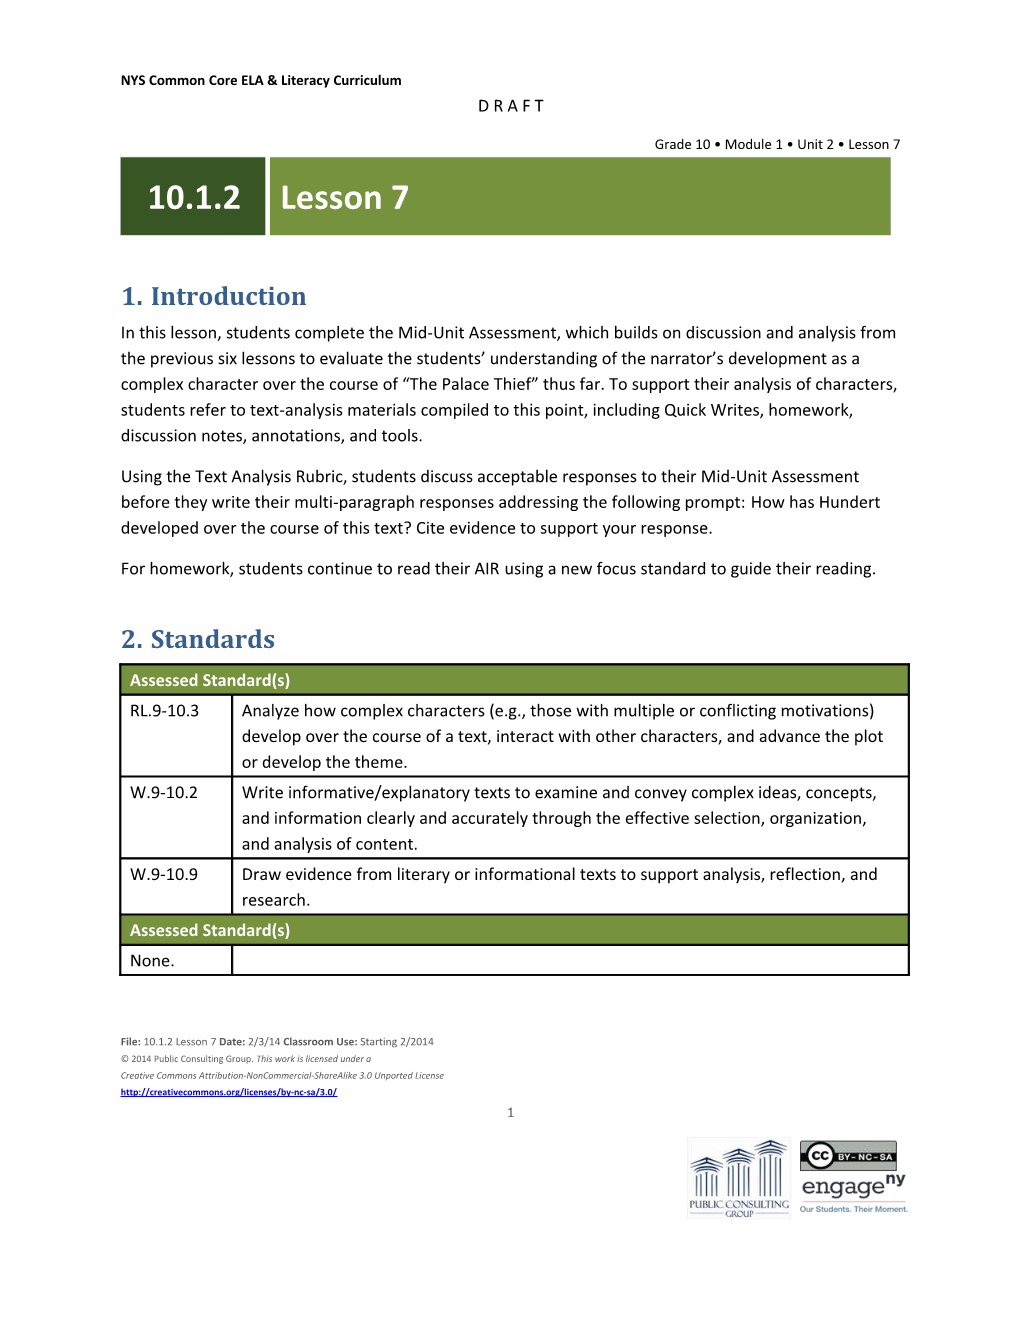 In This Lesson, Students Complete the Mid-Unit Assessment, Which Builds on Discussion And